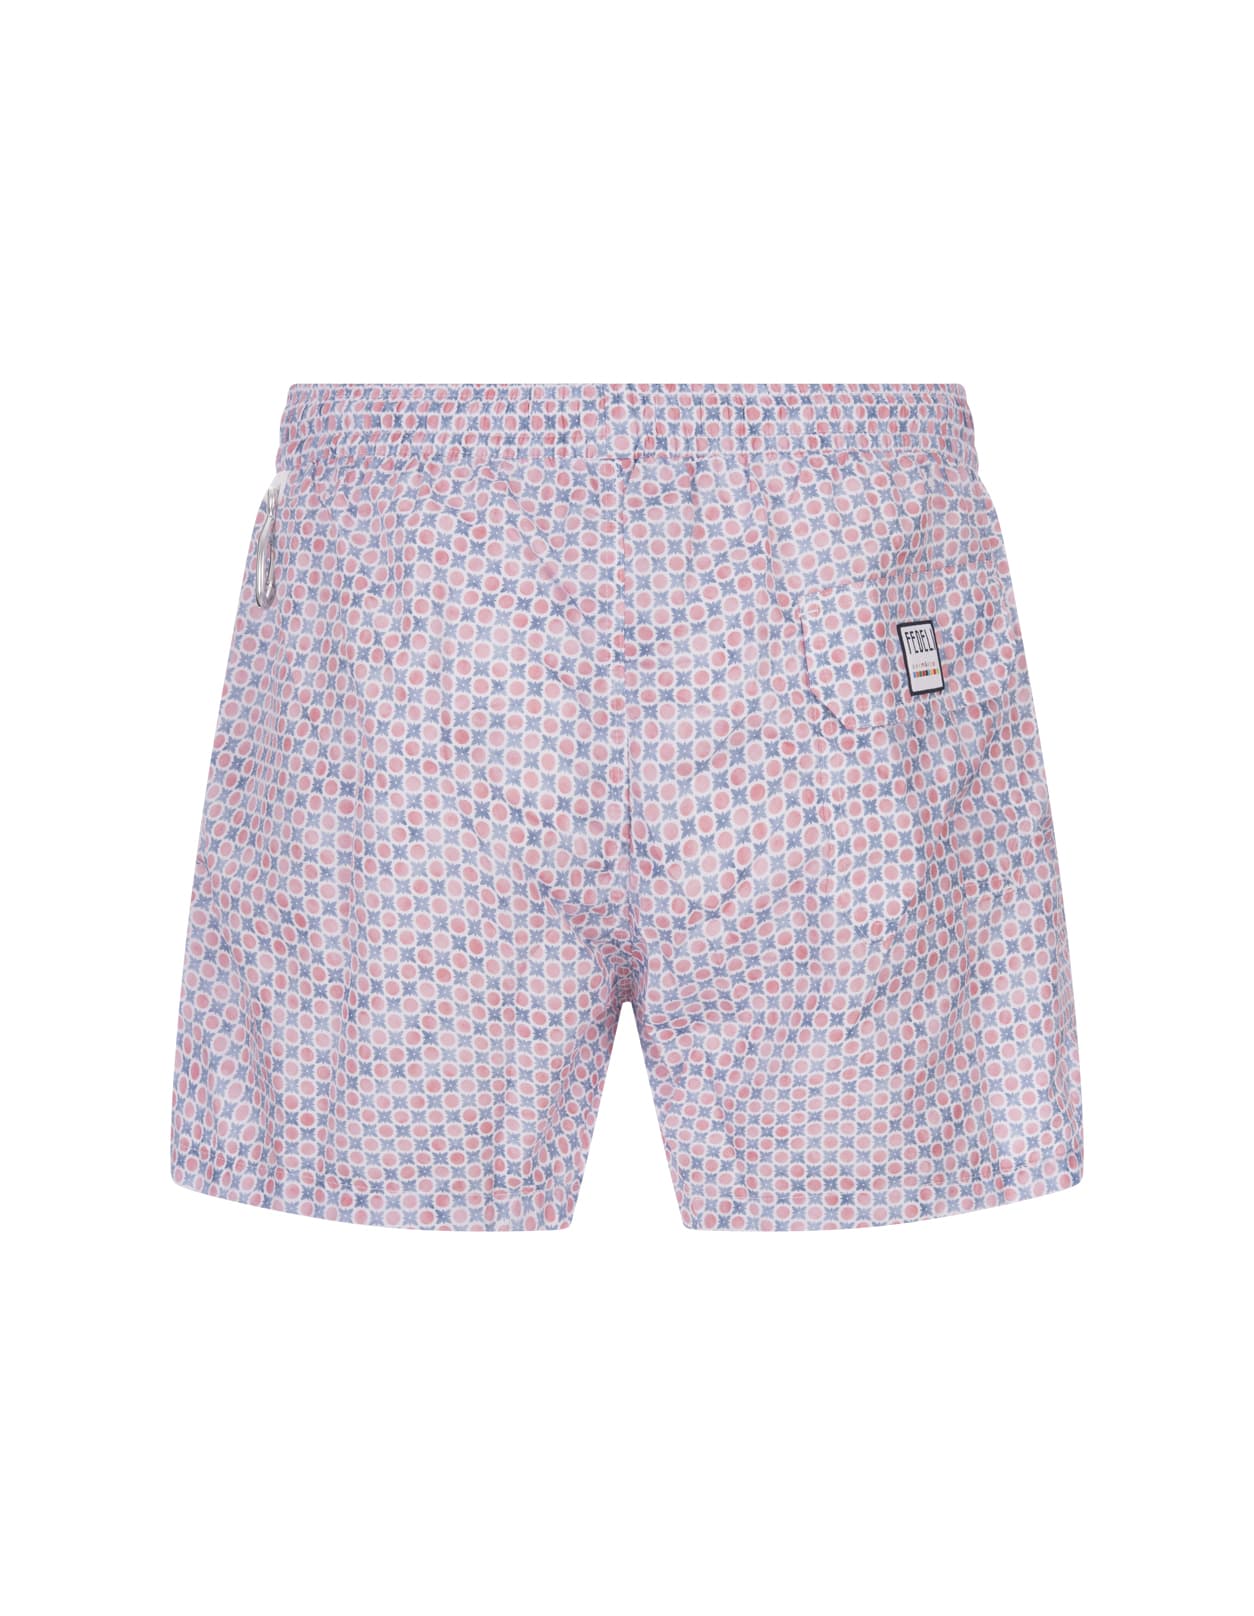 Shop Fedeli Swim Shorts With Micro Pattern Of Polka Dots And Flowers In Pink